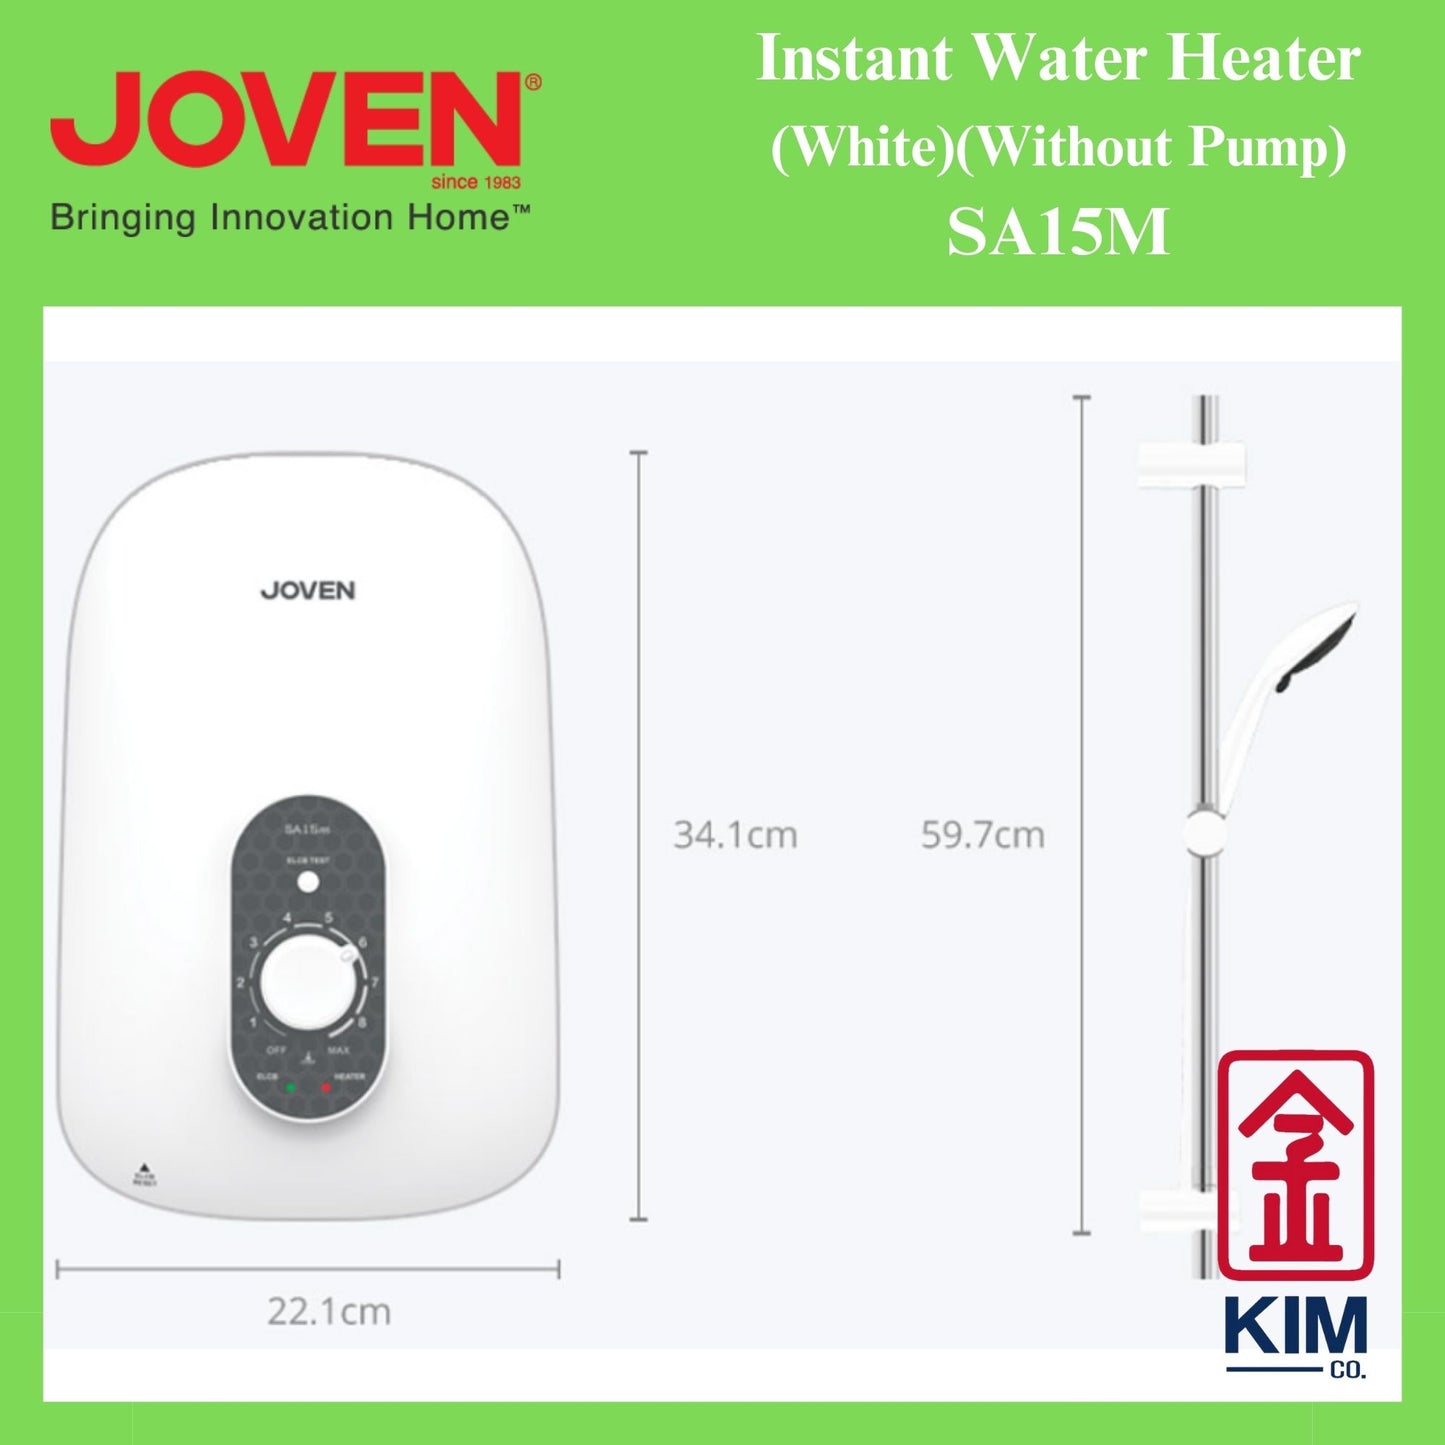 Joven Instant Water Heater Without Pump (SA15M) (White)